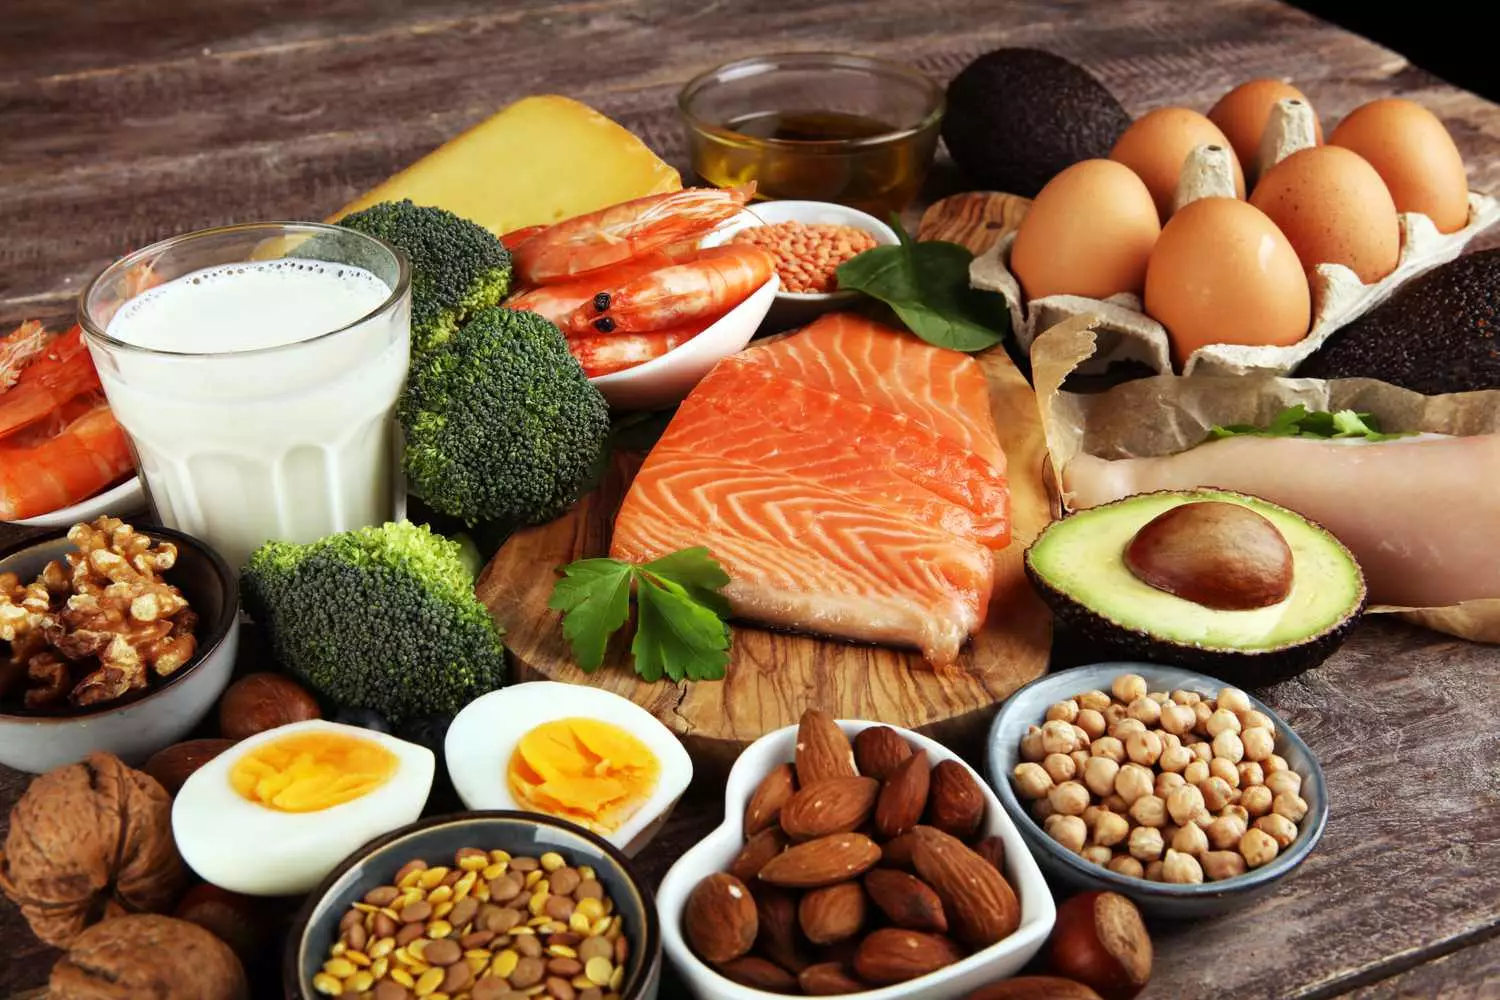 Risks and Benefits of Consuming Too Much Protein